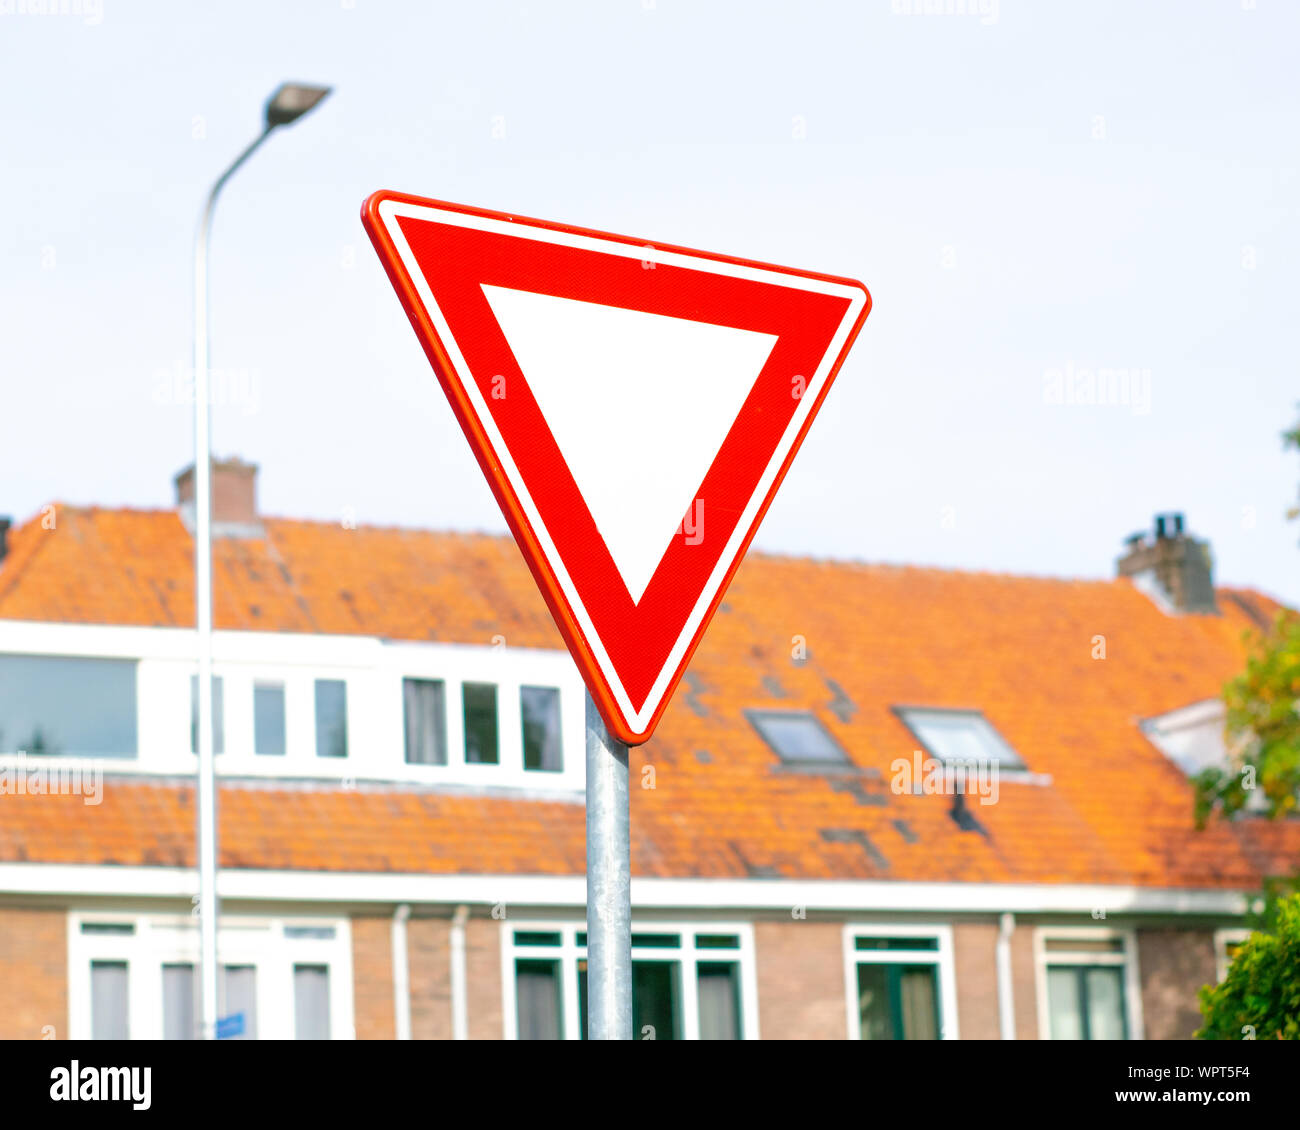 Dutch road sign: give priority to traffic on the main road ahead Stock Photo